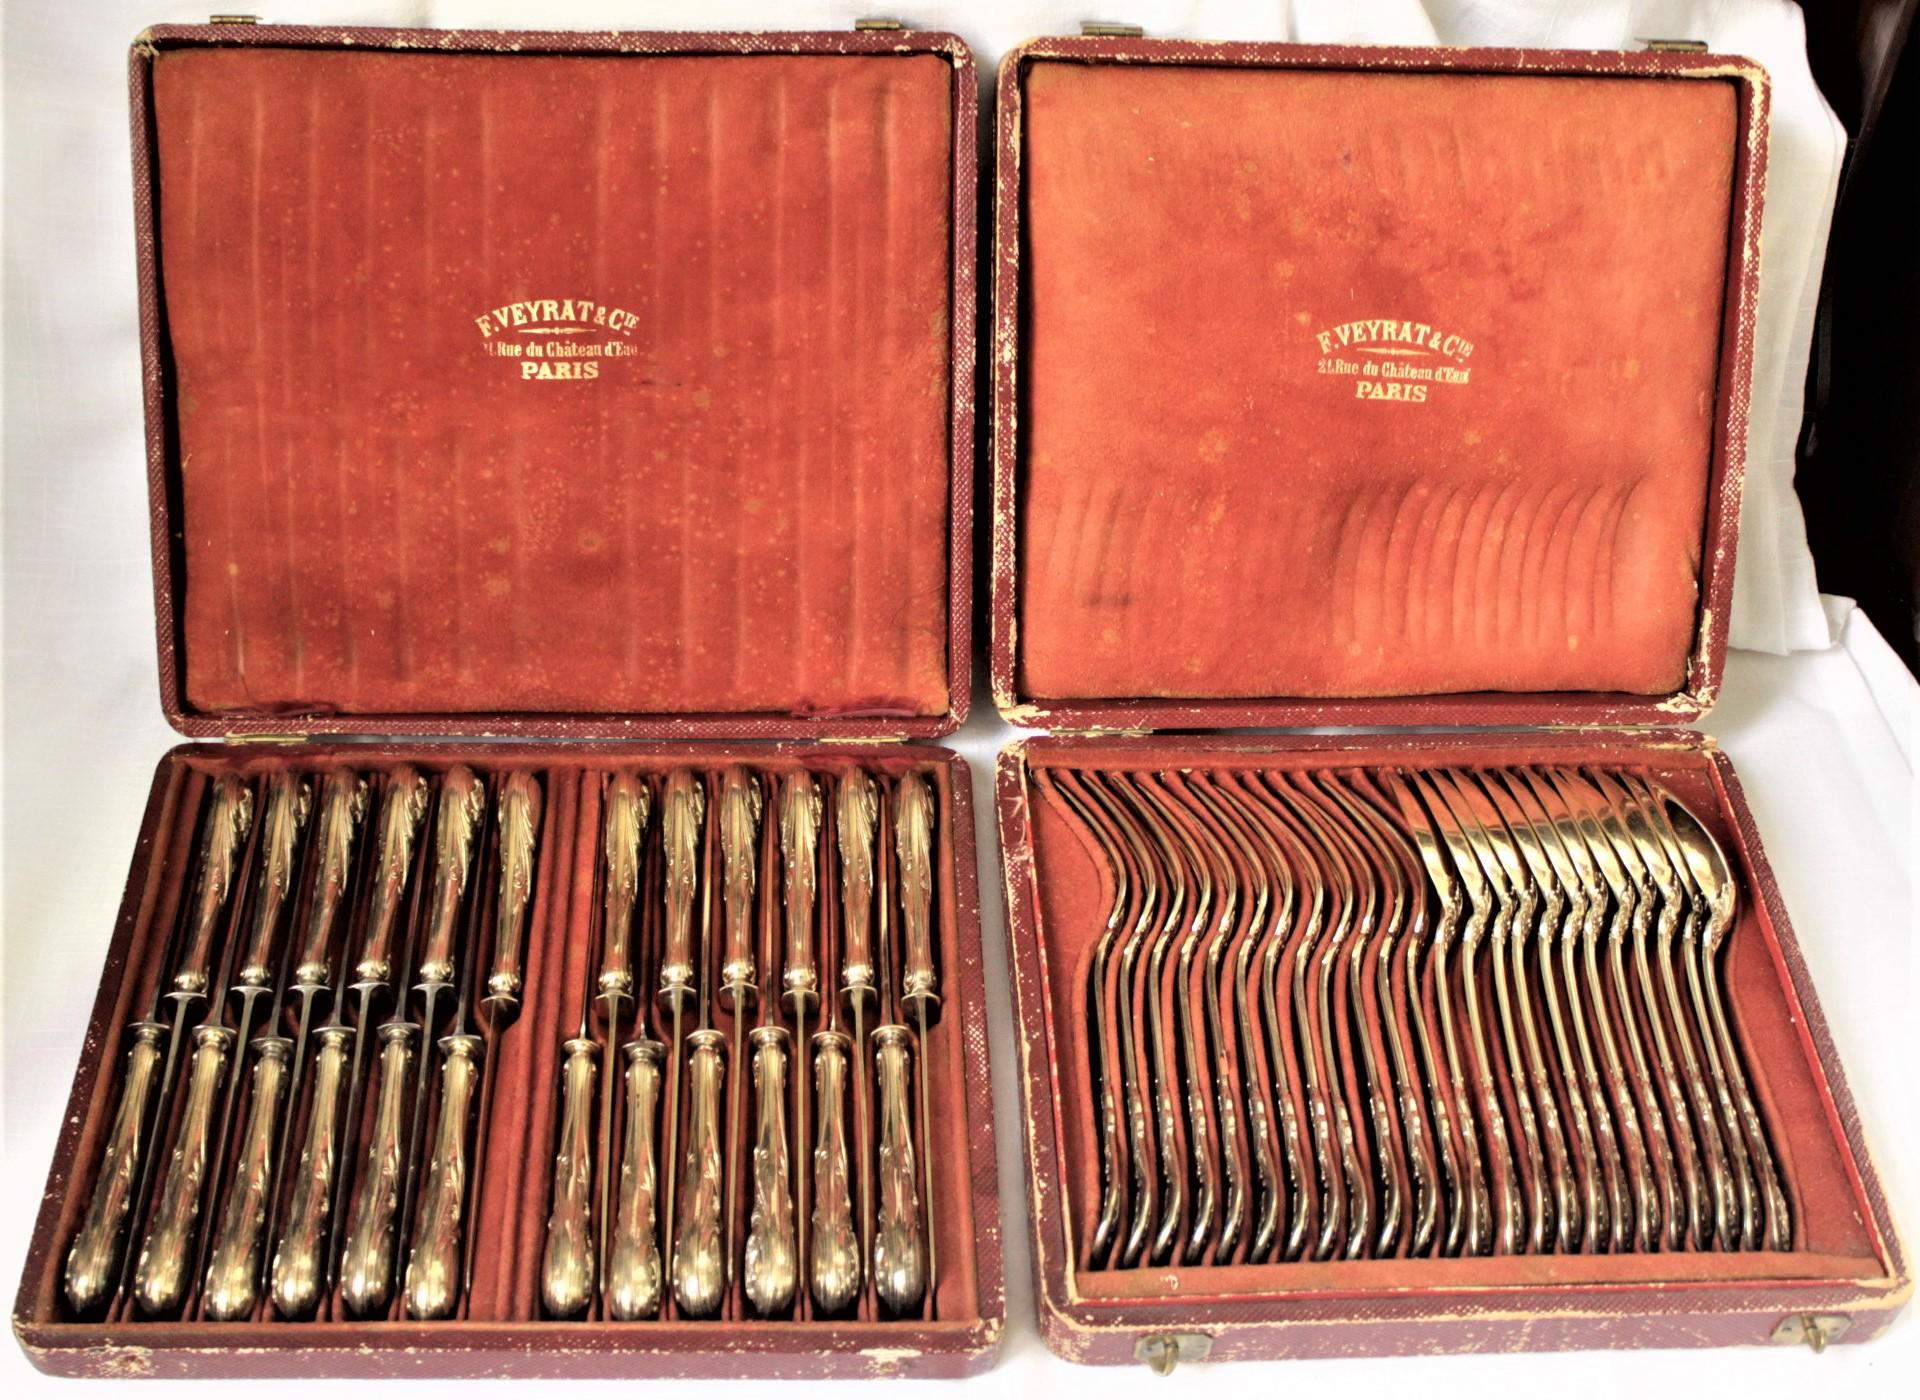 Antique Veyrat French Parisian Silver Flatware Dinner Service for 12 with Boxes For Sale 3